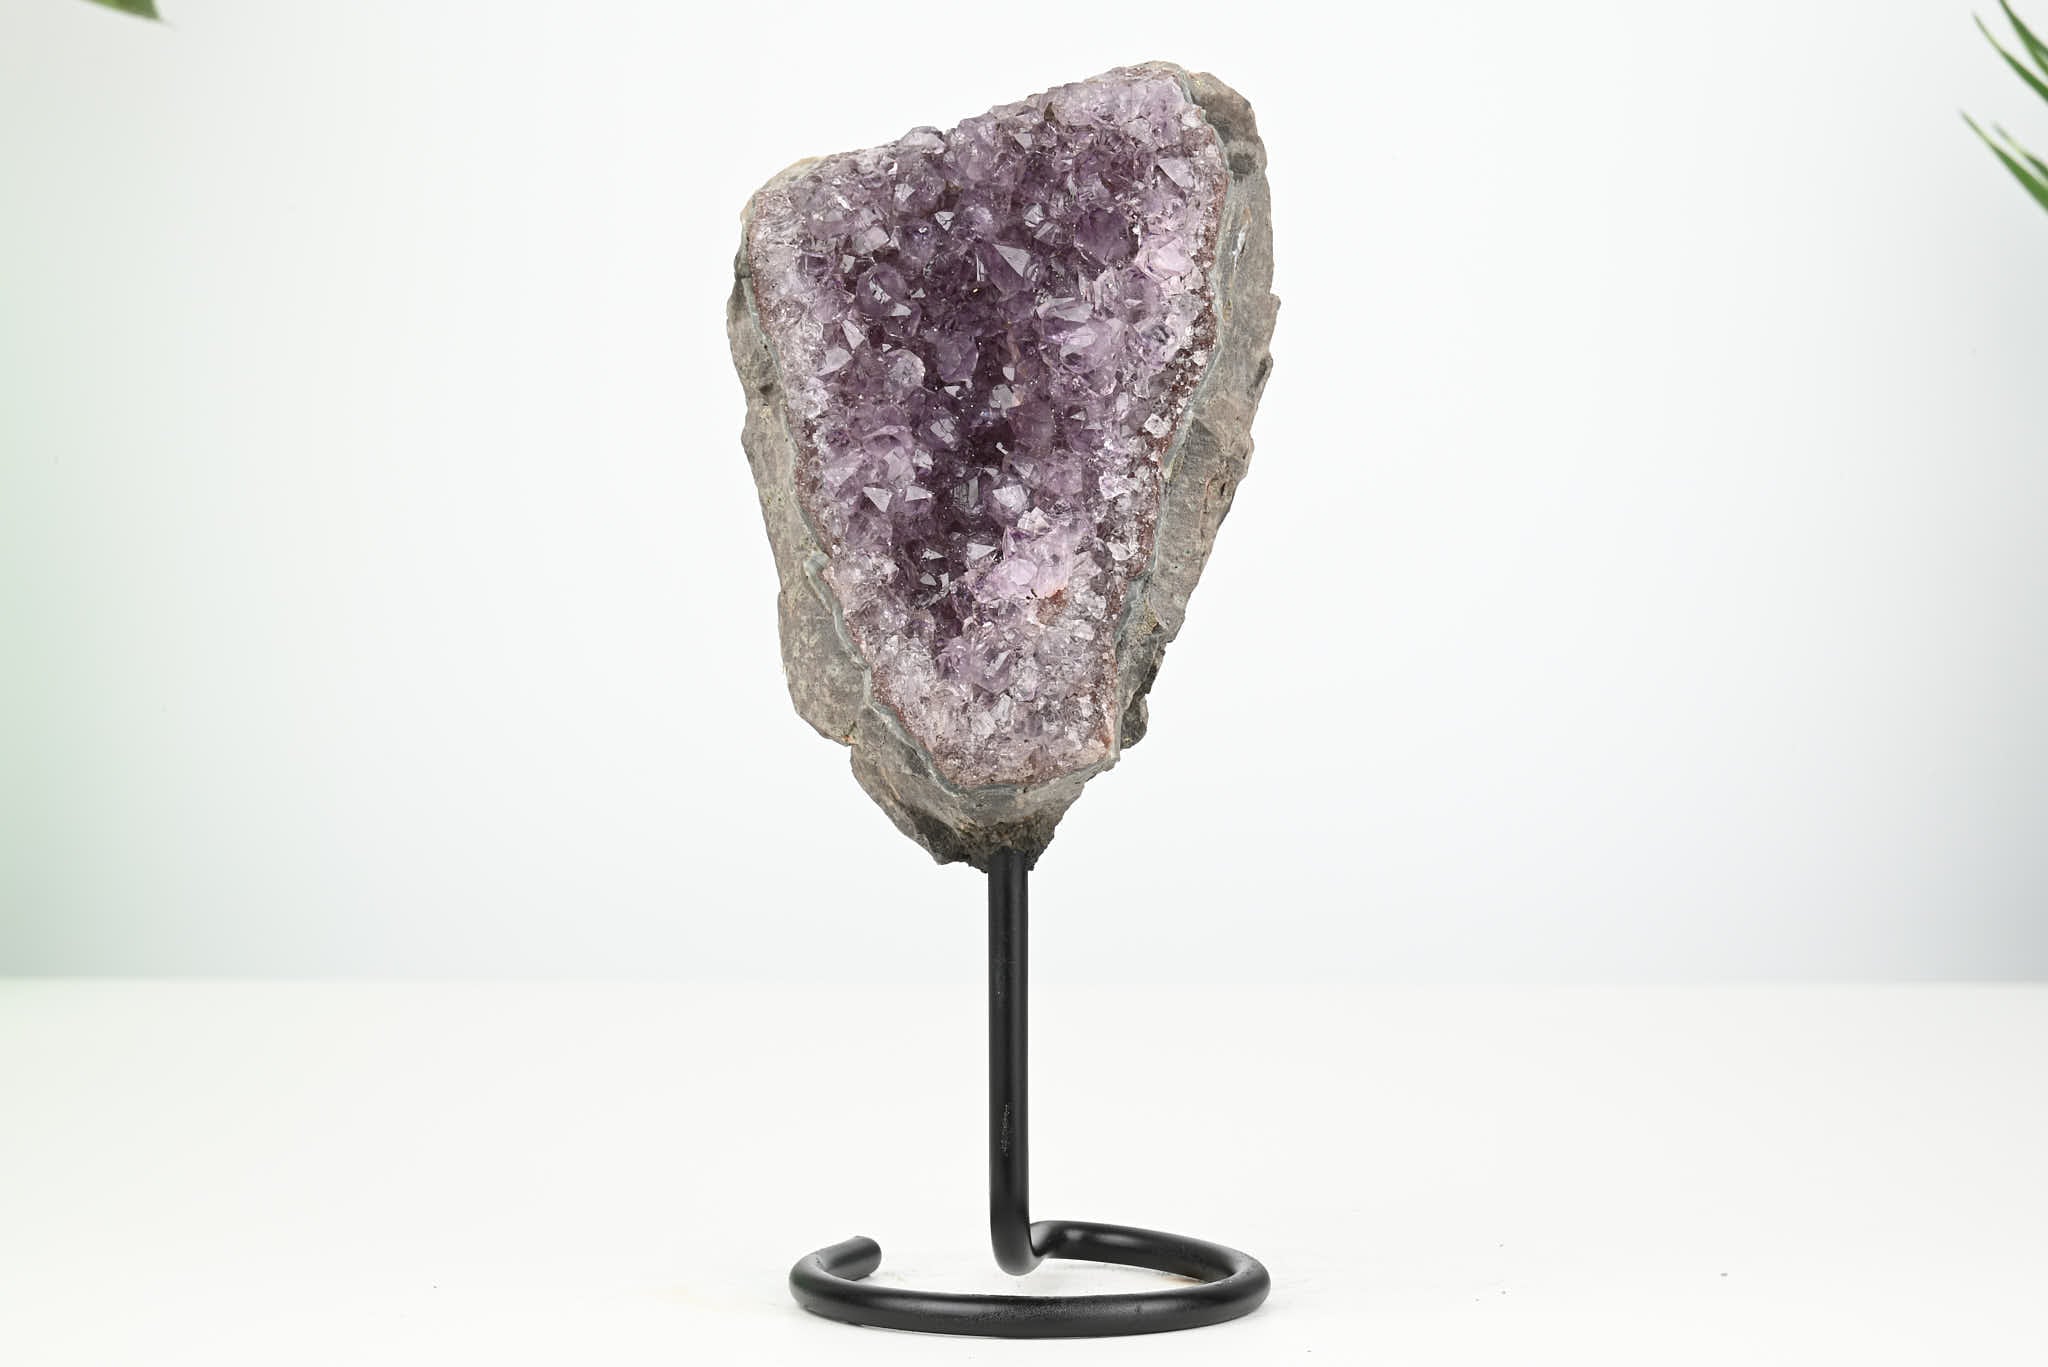 Amethyst Cluster on Stand - Small 17cm Tall - #CLUSAM-63030